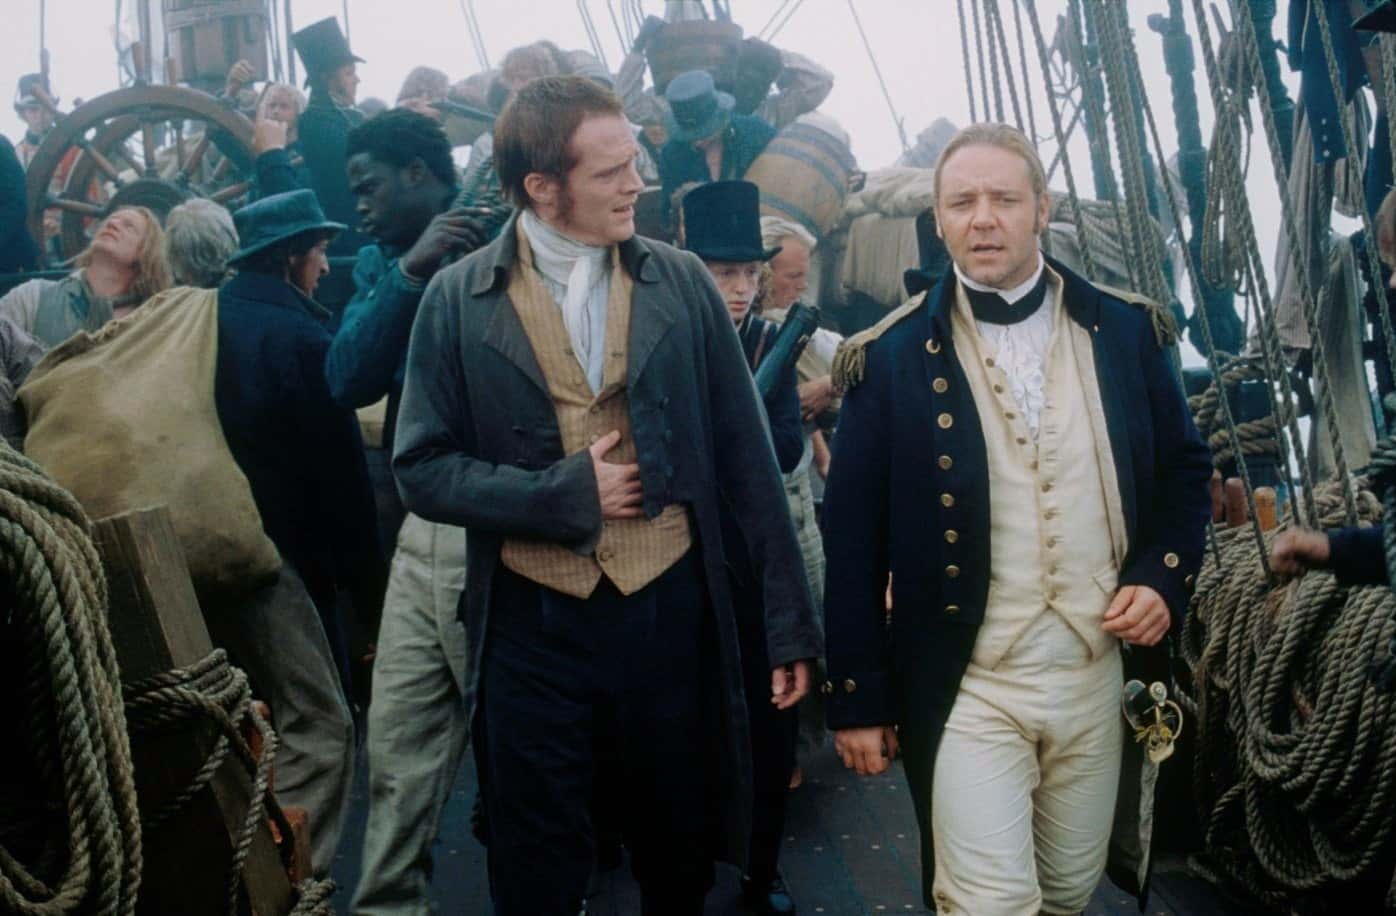 Master And Commander The Far Side Of The World (2003)